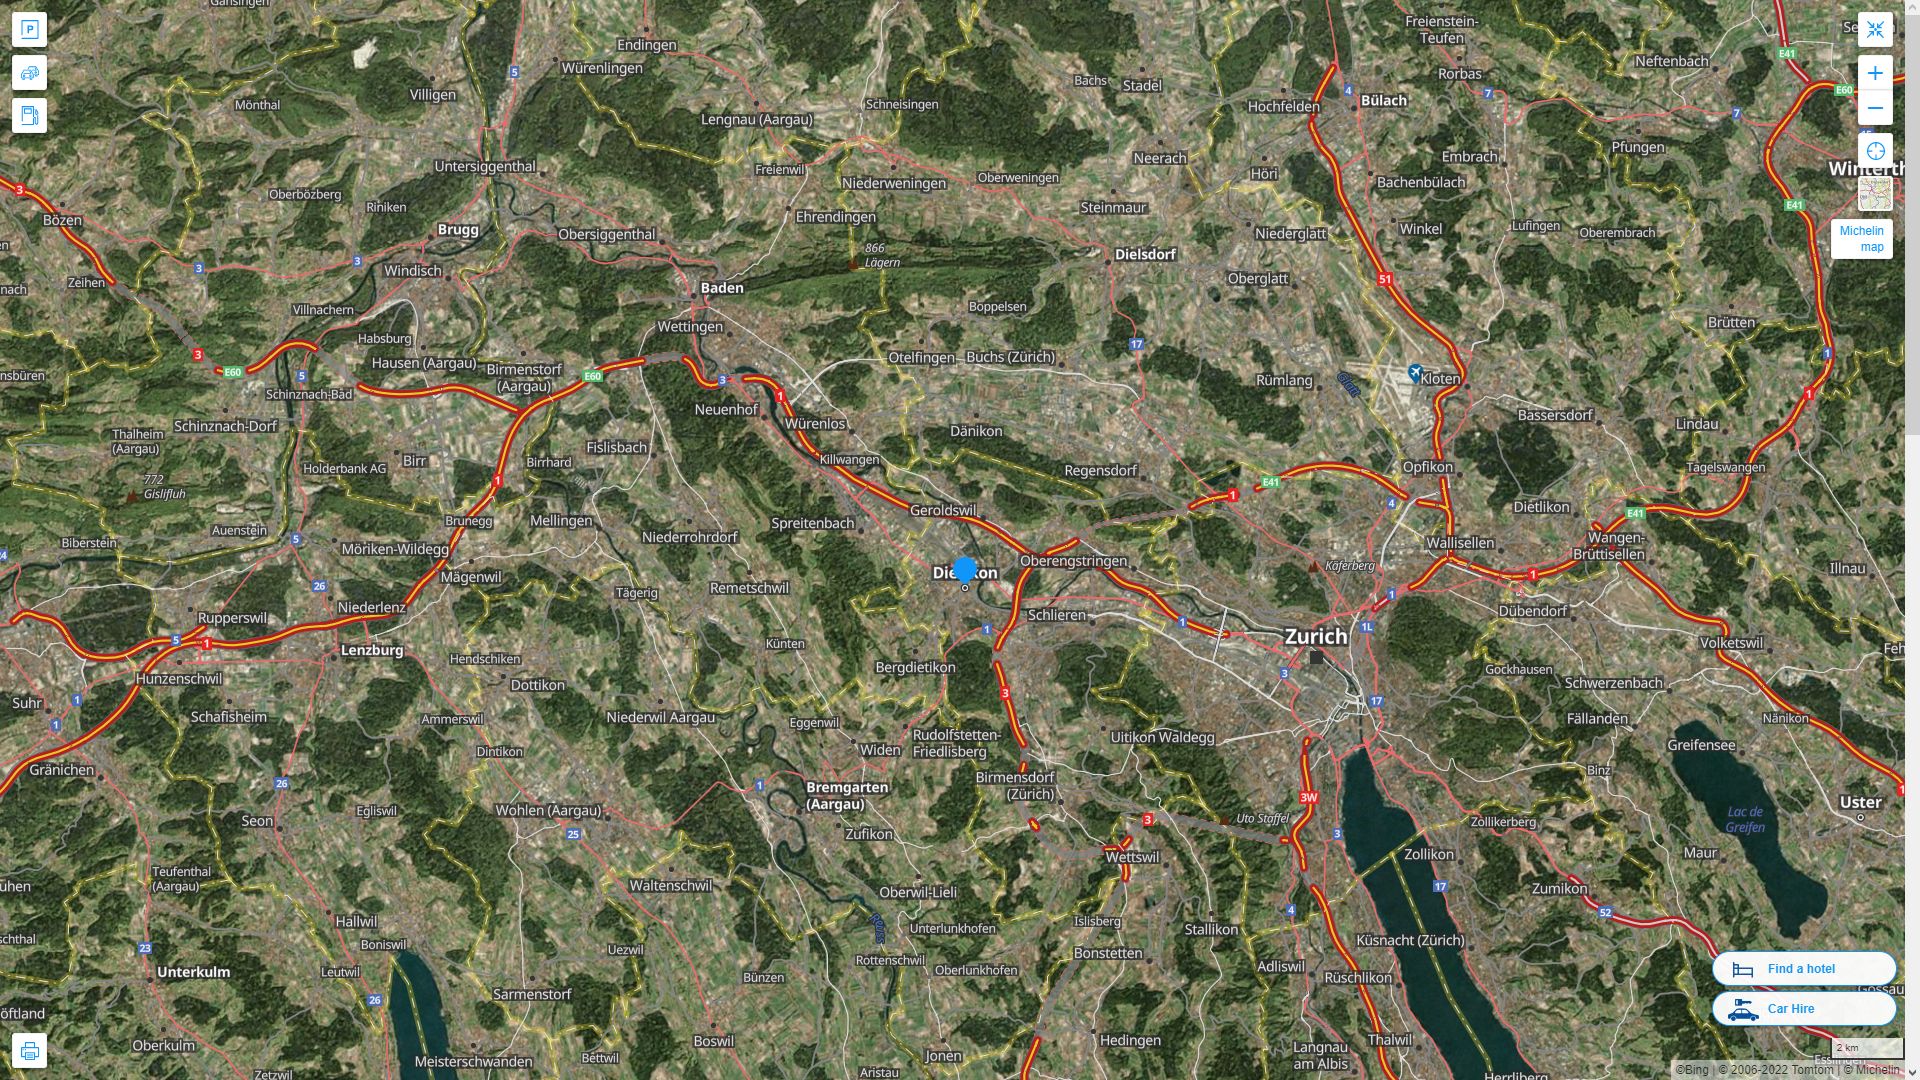 Dietikon Highway and Road Map with Satellite View